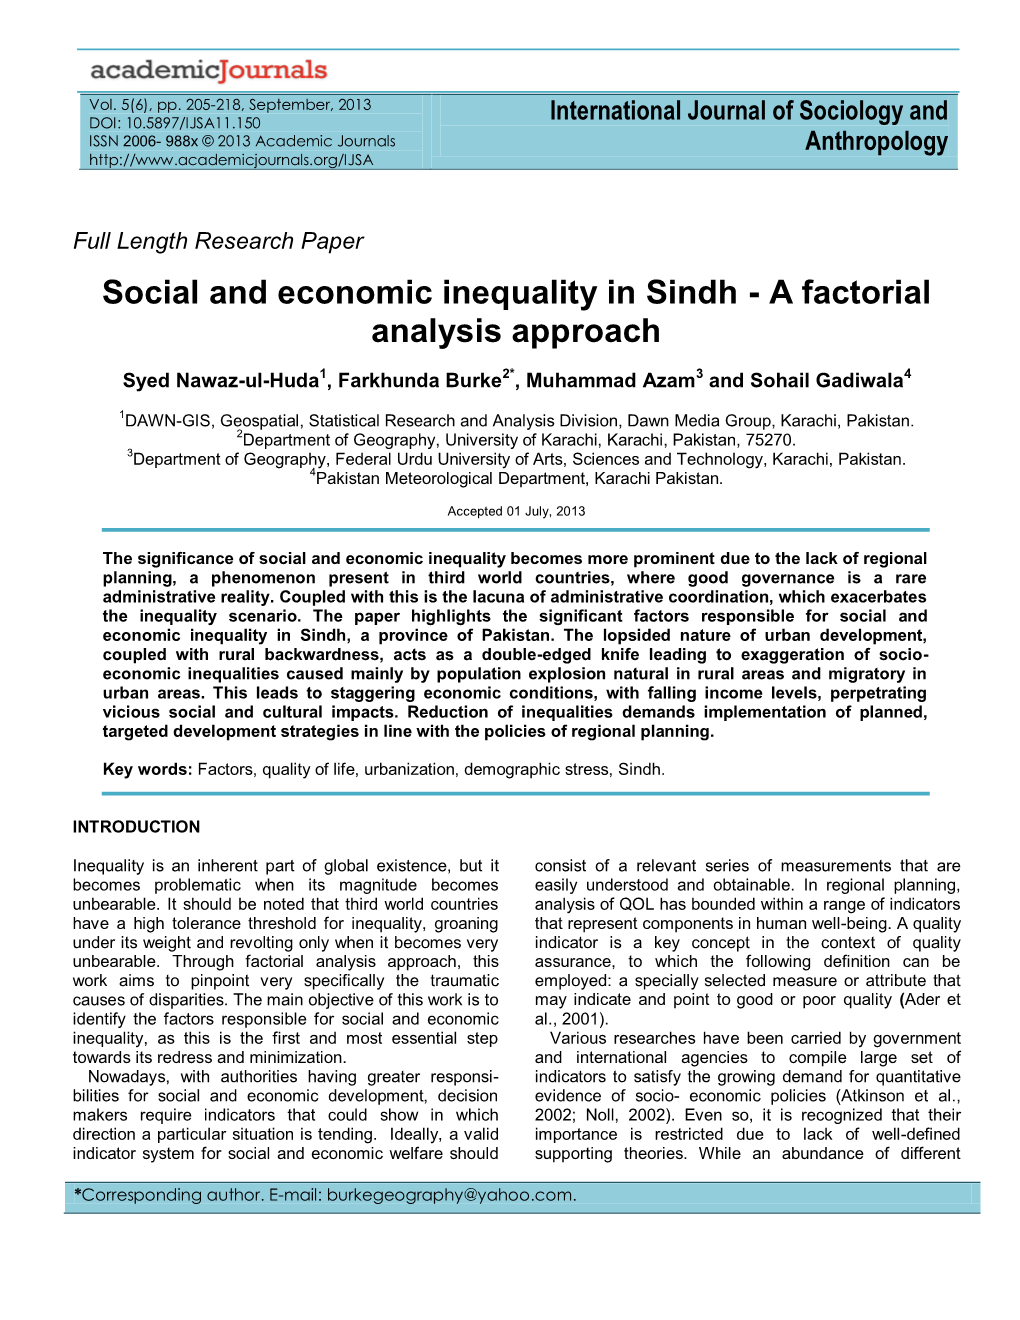 Social and Economic Inequality in Sindh - a Factorial Analysis Approach